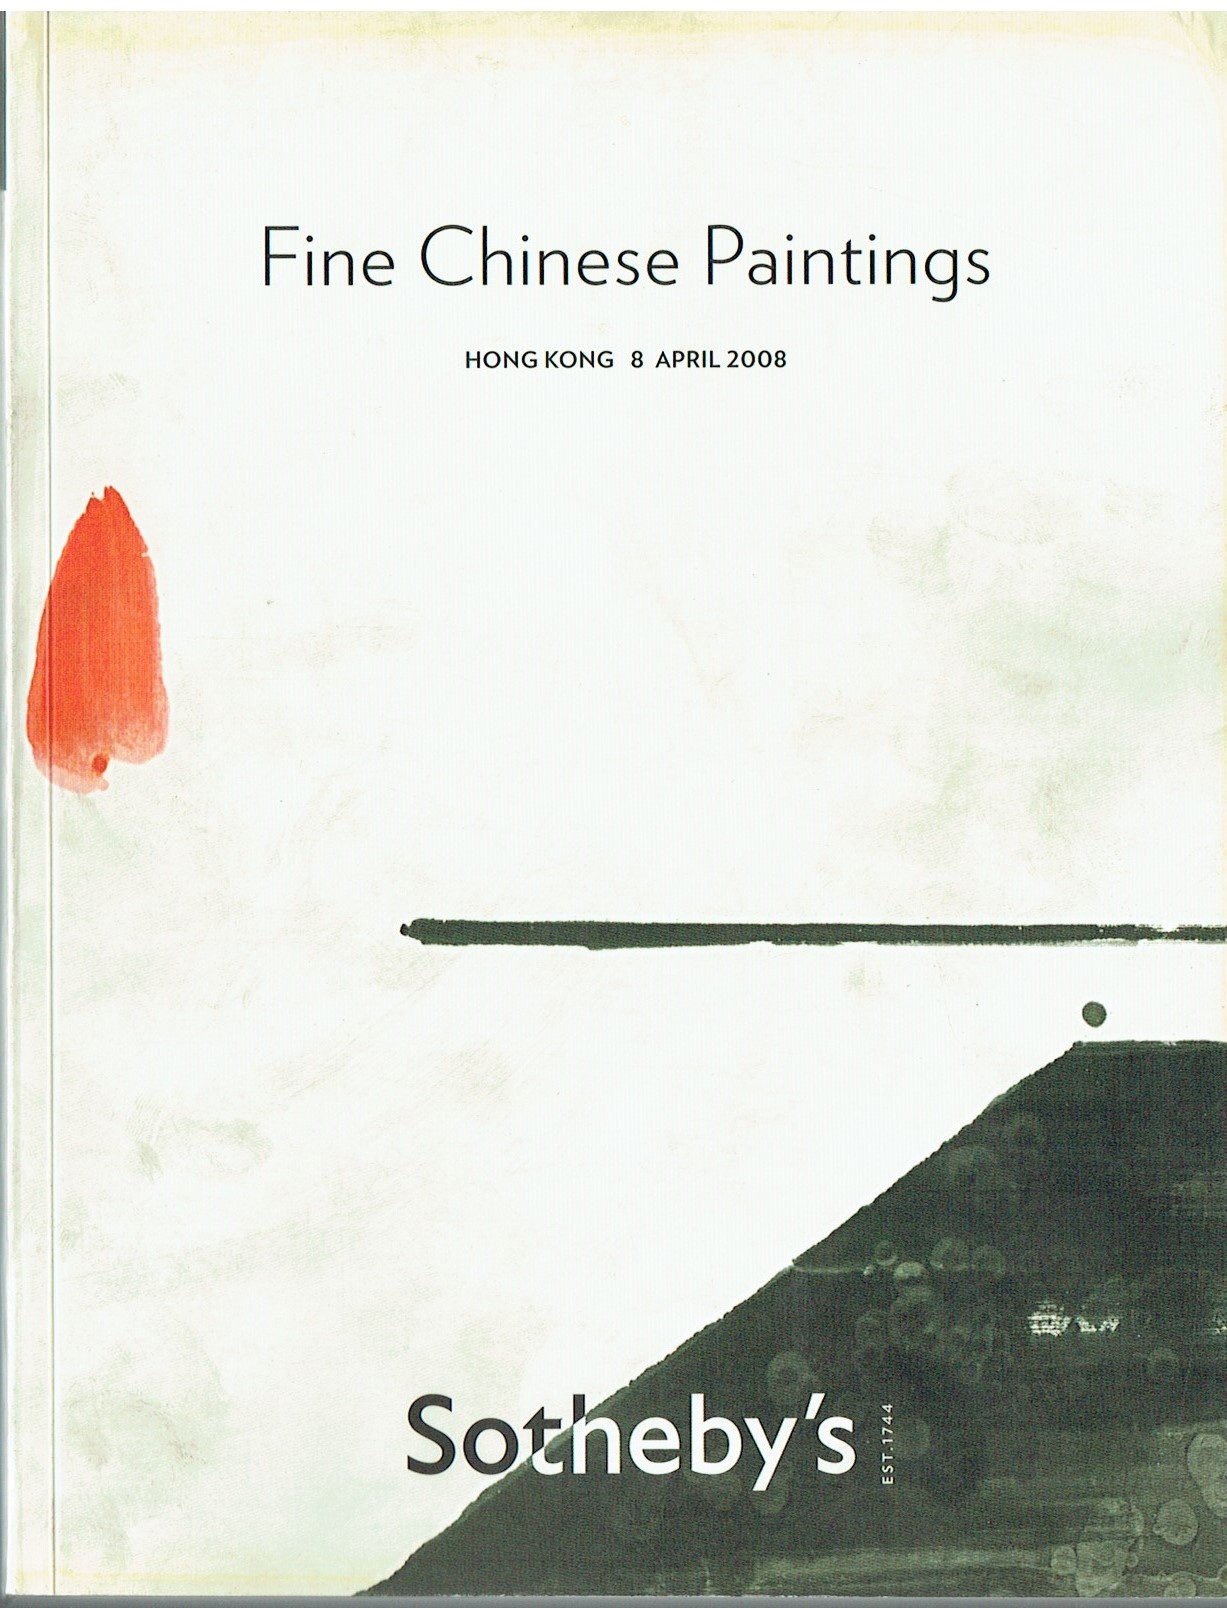 Sotheby's April 2008 Fine Chinese Paintings